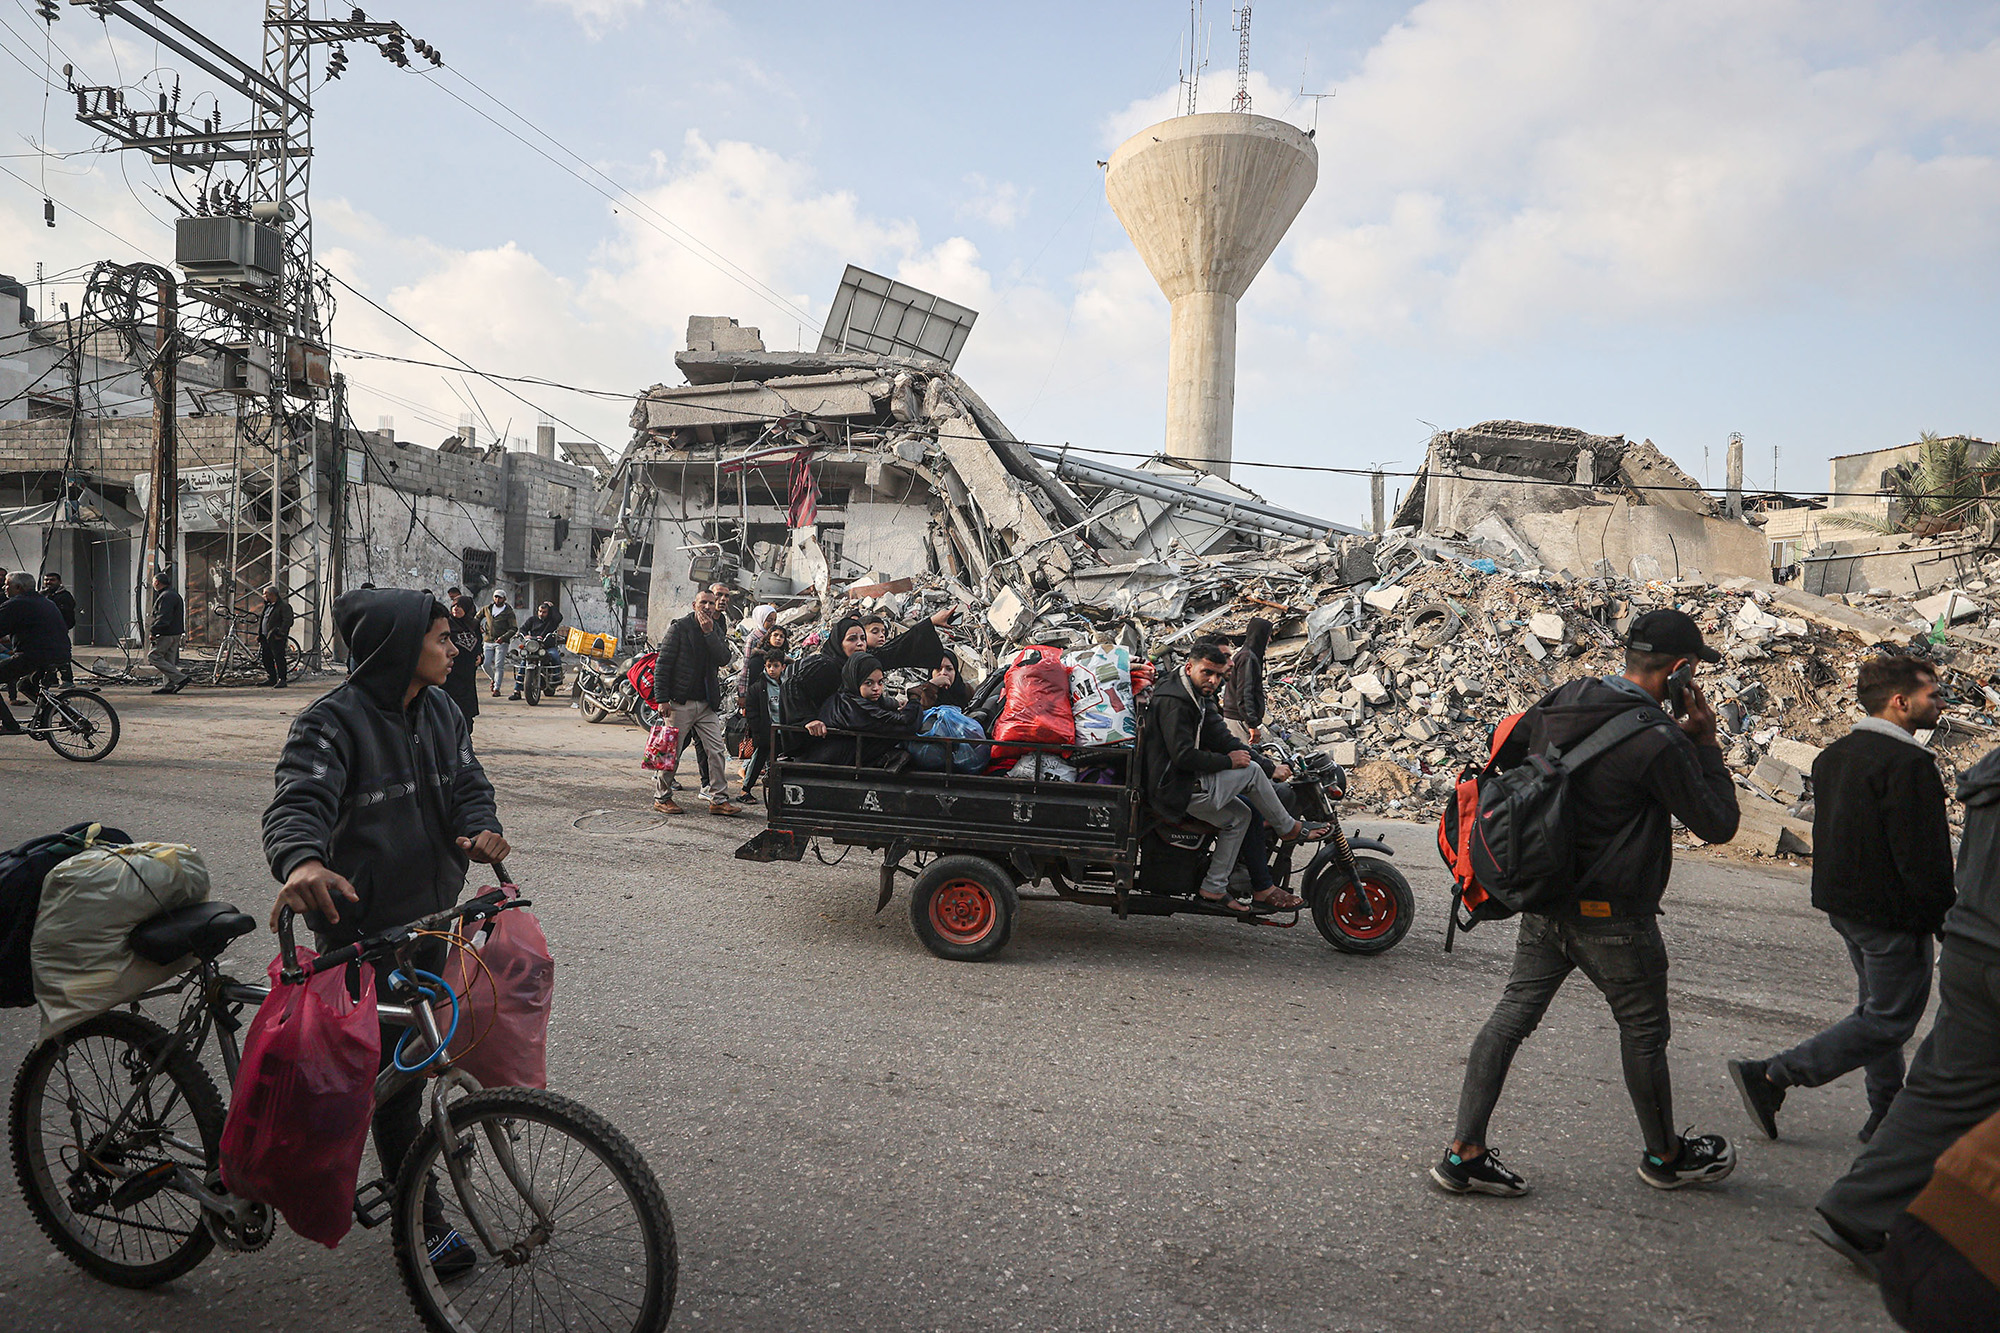 Palestinians begin to migrate to areas in the central part of the city due to Israeli attacks following the end of the week-long humanitarian pause in Khan Younis, Gaza, on December 1. 